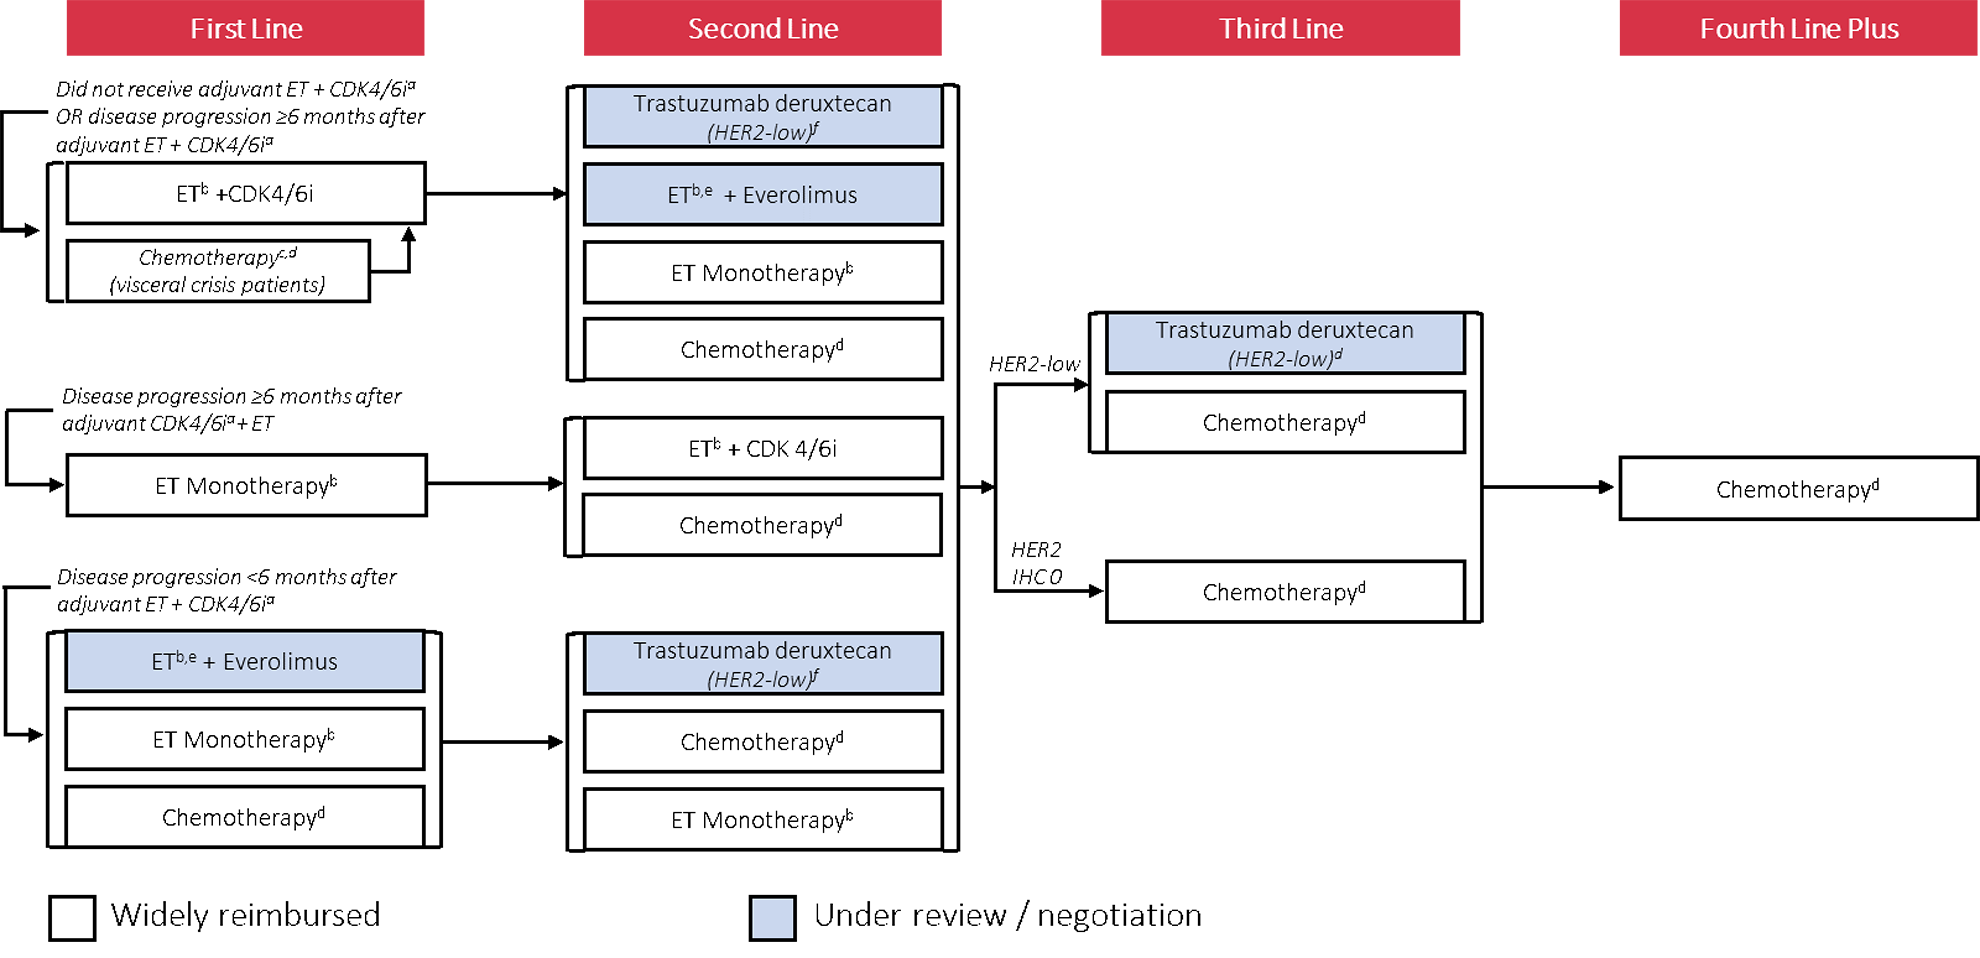 Describes the treatment algorithm for HR-positive, HER2-negative mBC. From left to right, treatment includes the first line (ET plus CDK4/6 inhibitor, chemotherapy, ET monotherapy, ET plus everolimus); the second line (T-DXd) for HER2-low (ET plus everolimus, ET monotherapy, chemotherapy, ET plus CDK4/6 inhibitor); the third line (T-DXd or chemotherapy for HER2-low, chemotherapy for HER2, IHC 0); and the fourth line and beyond (chemotherapy).